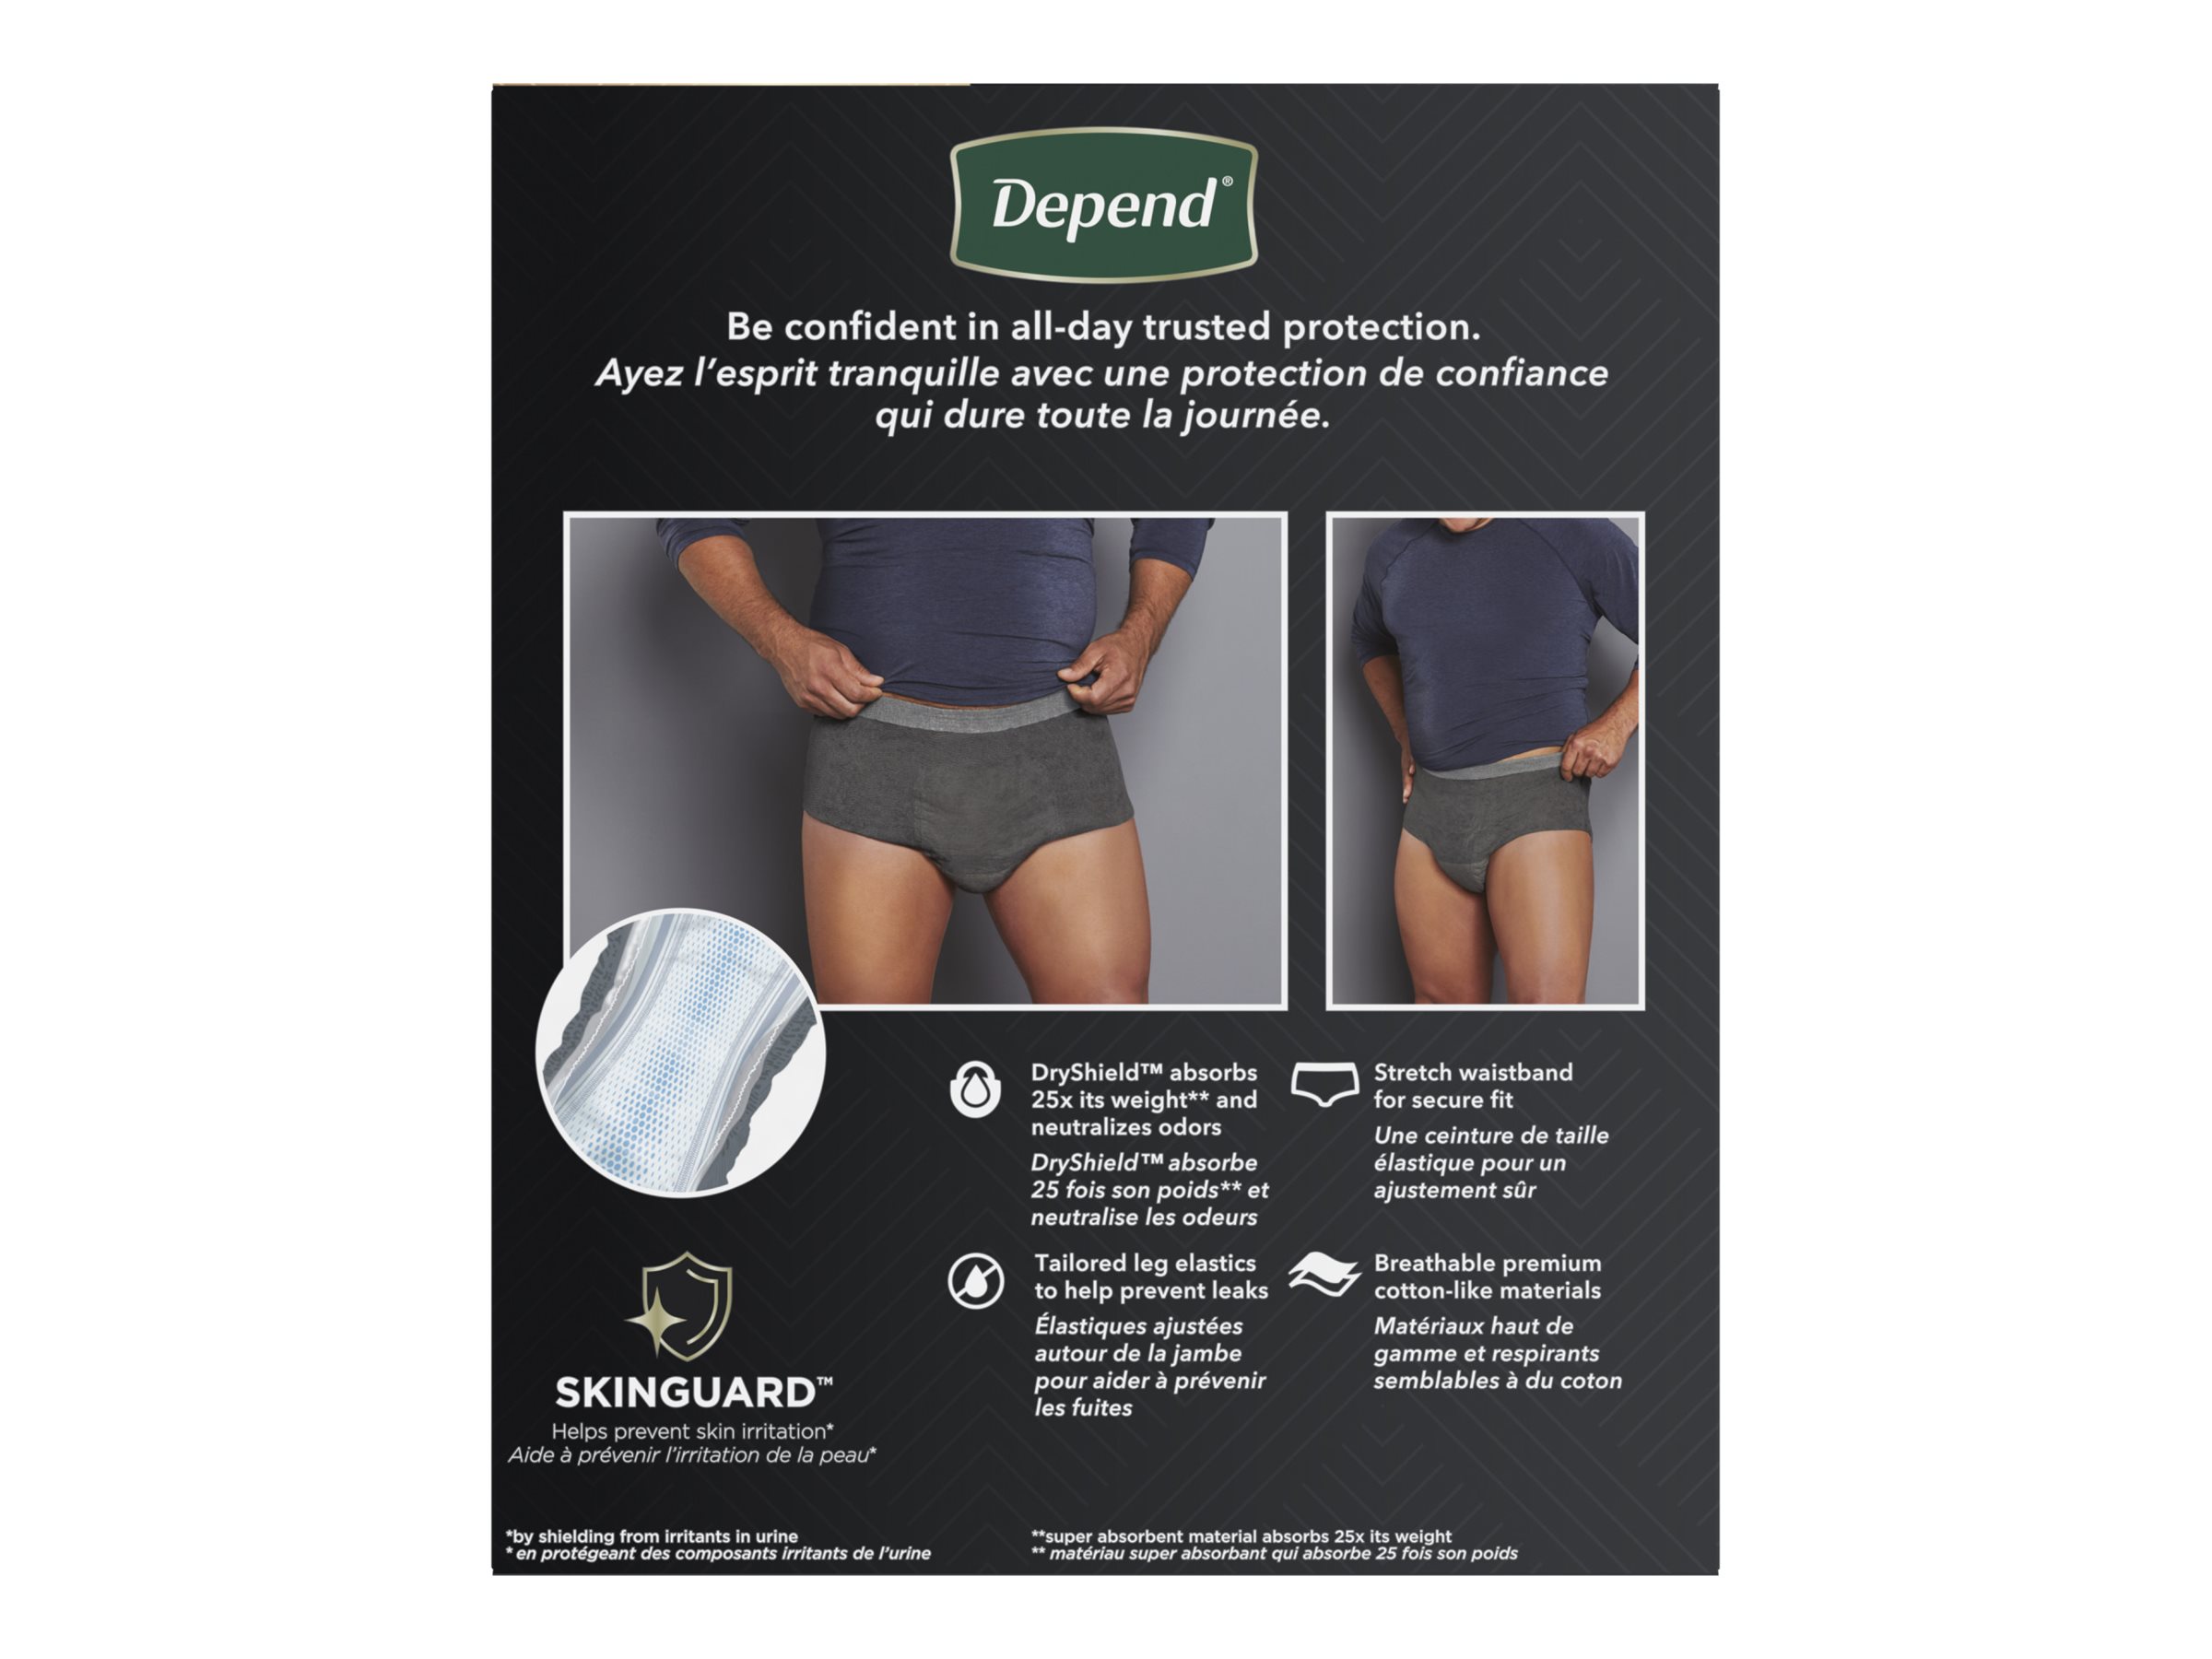 Depend Real Fit Incontinence Underwear for Men Maximum Absorbency L/XL